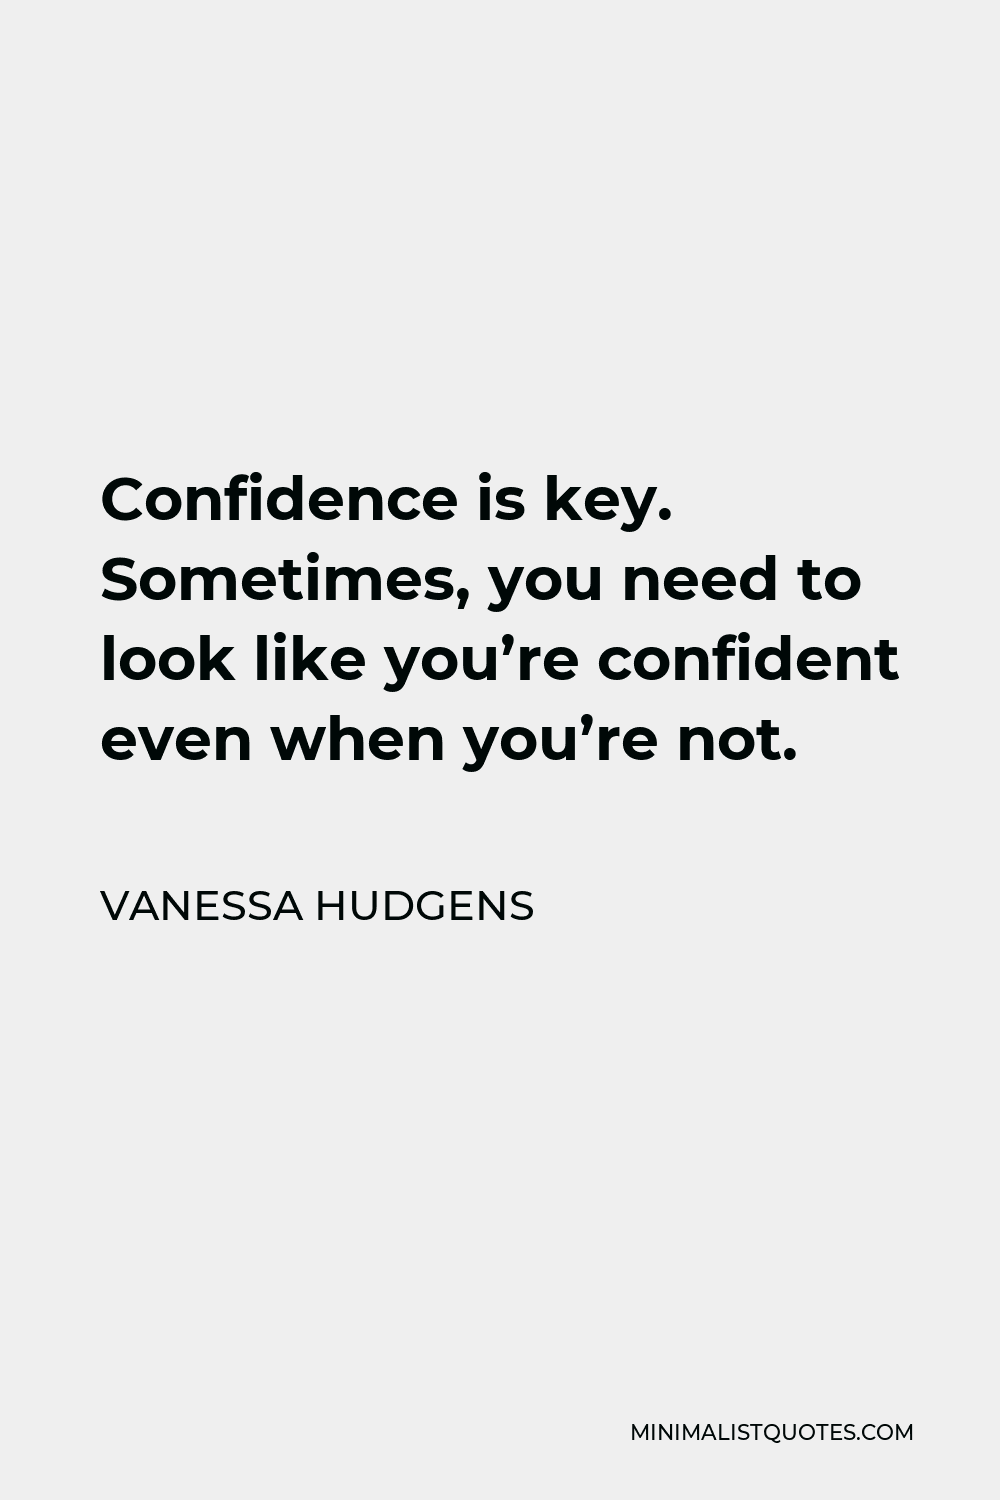 Vanessa Hudgens Quote - Confidence is key. Sometimes, you need to look like you’re confident even when you’re not.